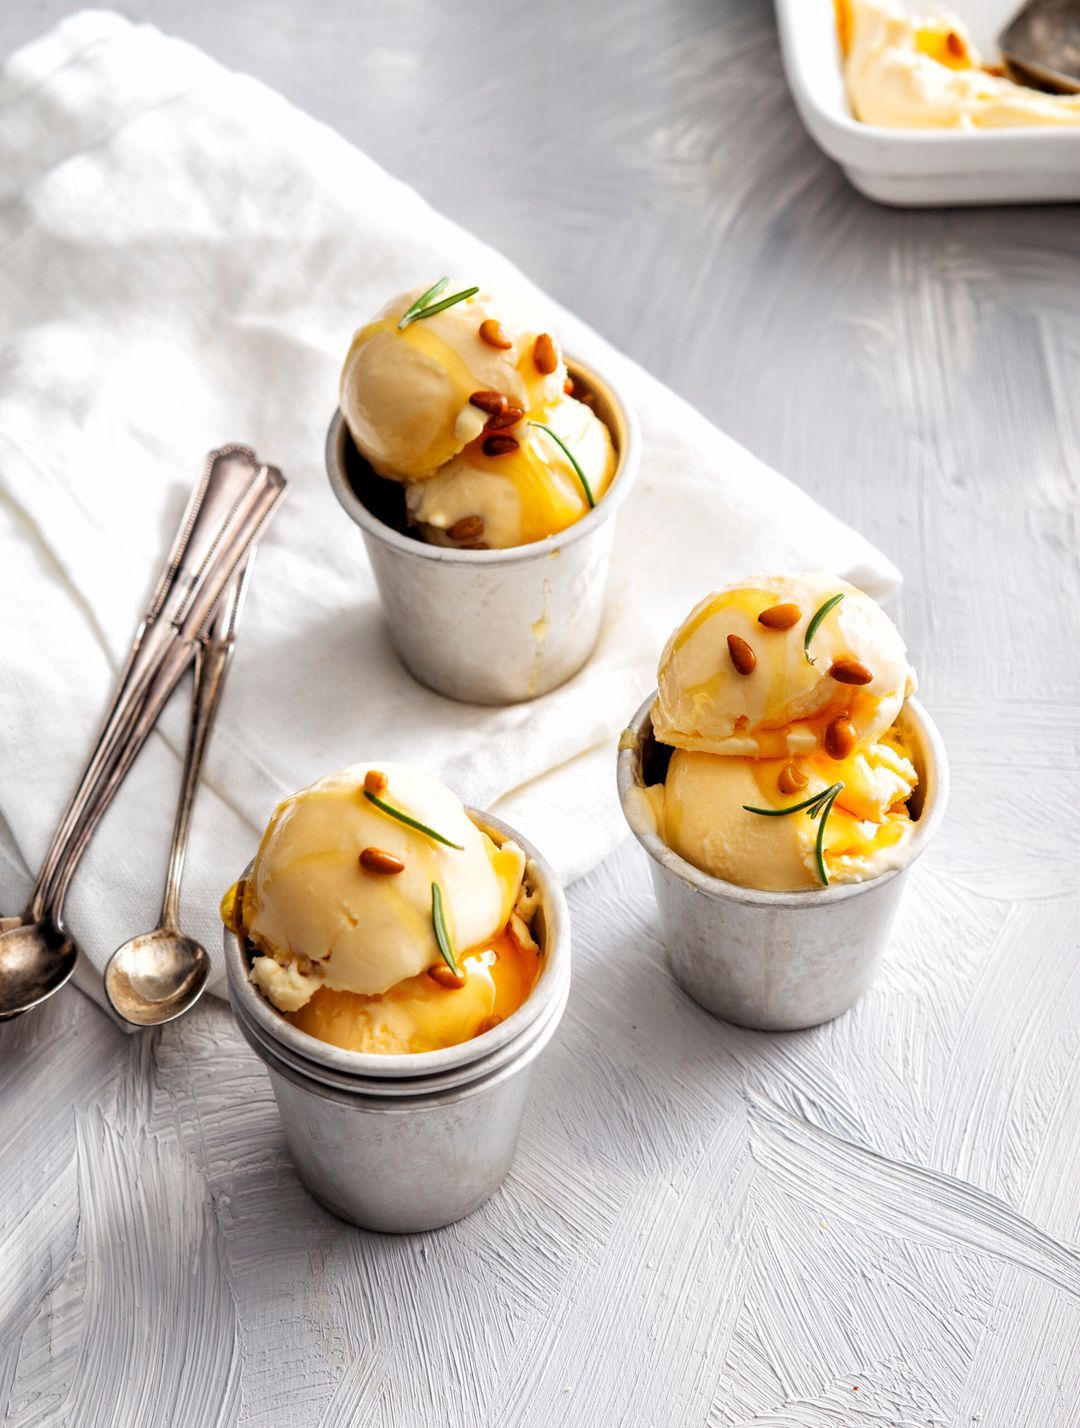 Buttermilk ice cream with rosemary, honey and pine nuts